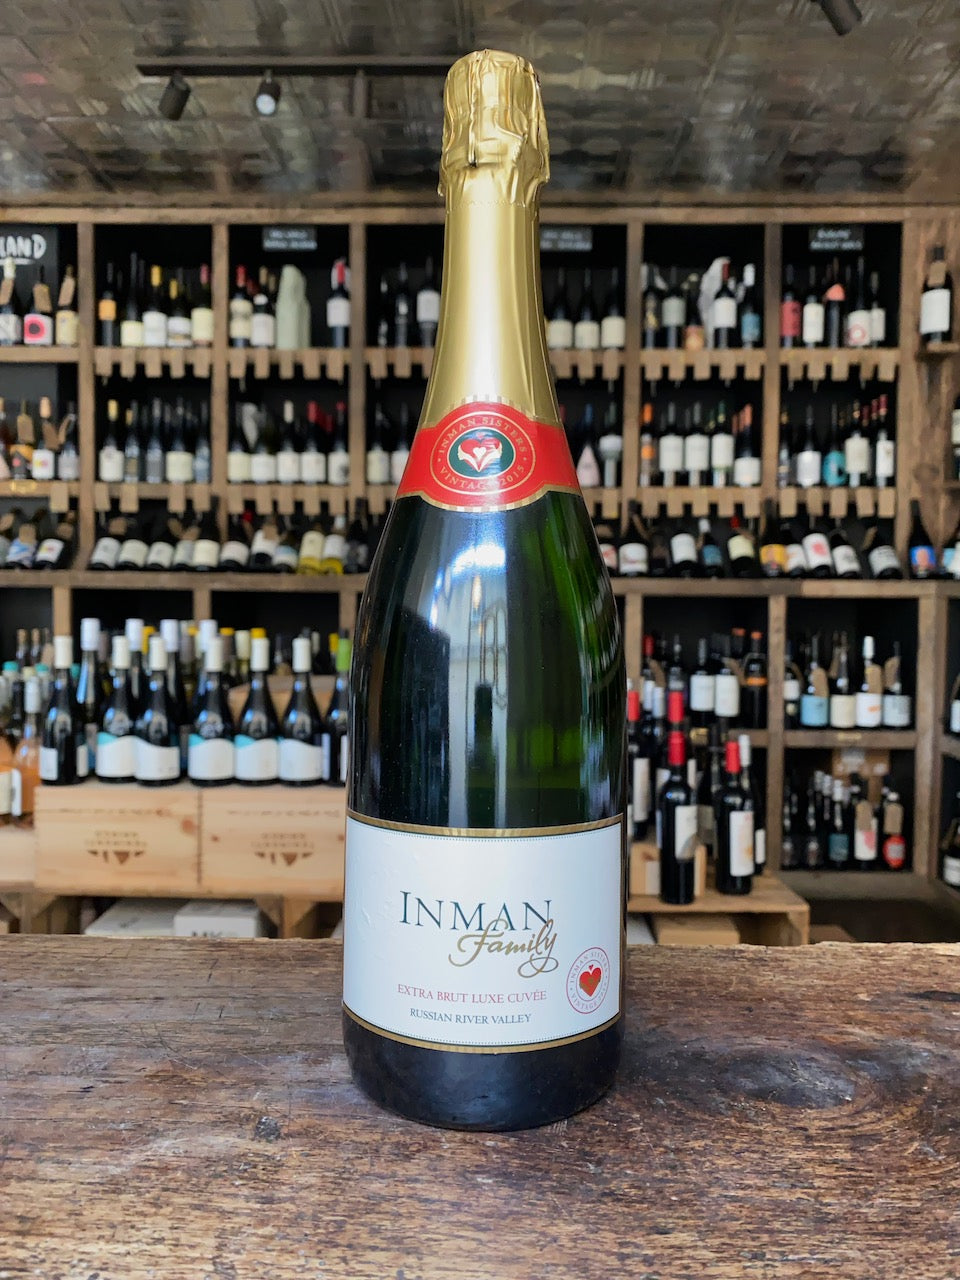 Extra Brut Luxe Cuvée, Inman Family 2015